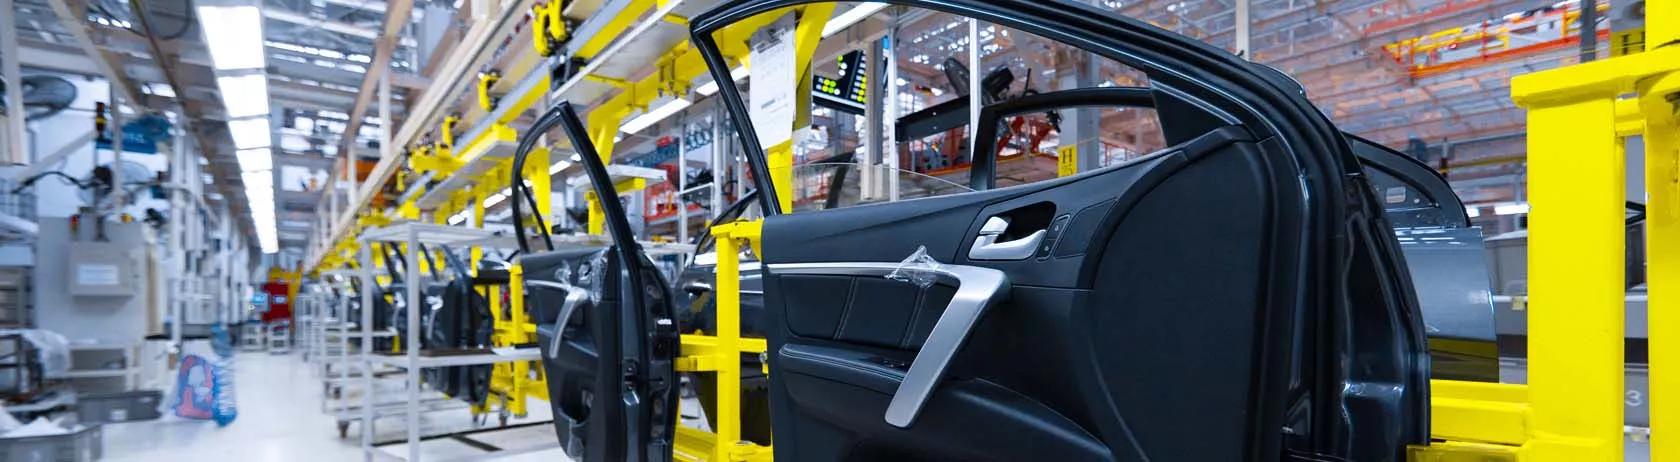 Cable Management solutions used in the Automotive industry